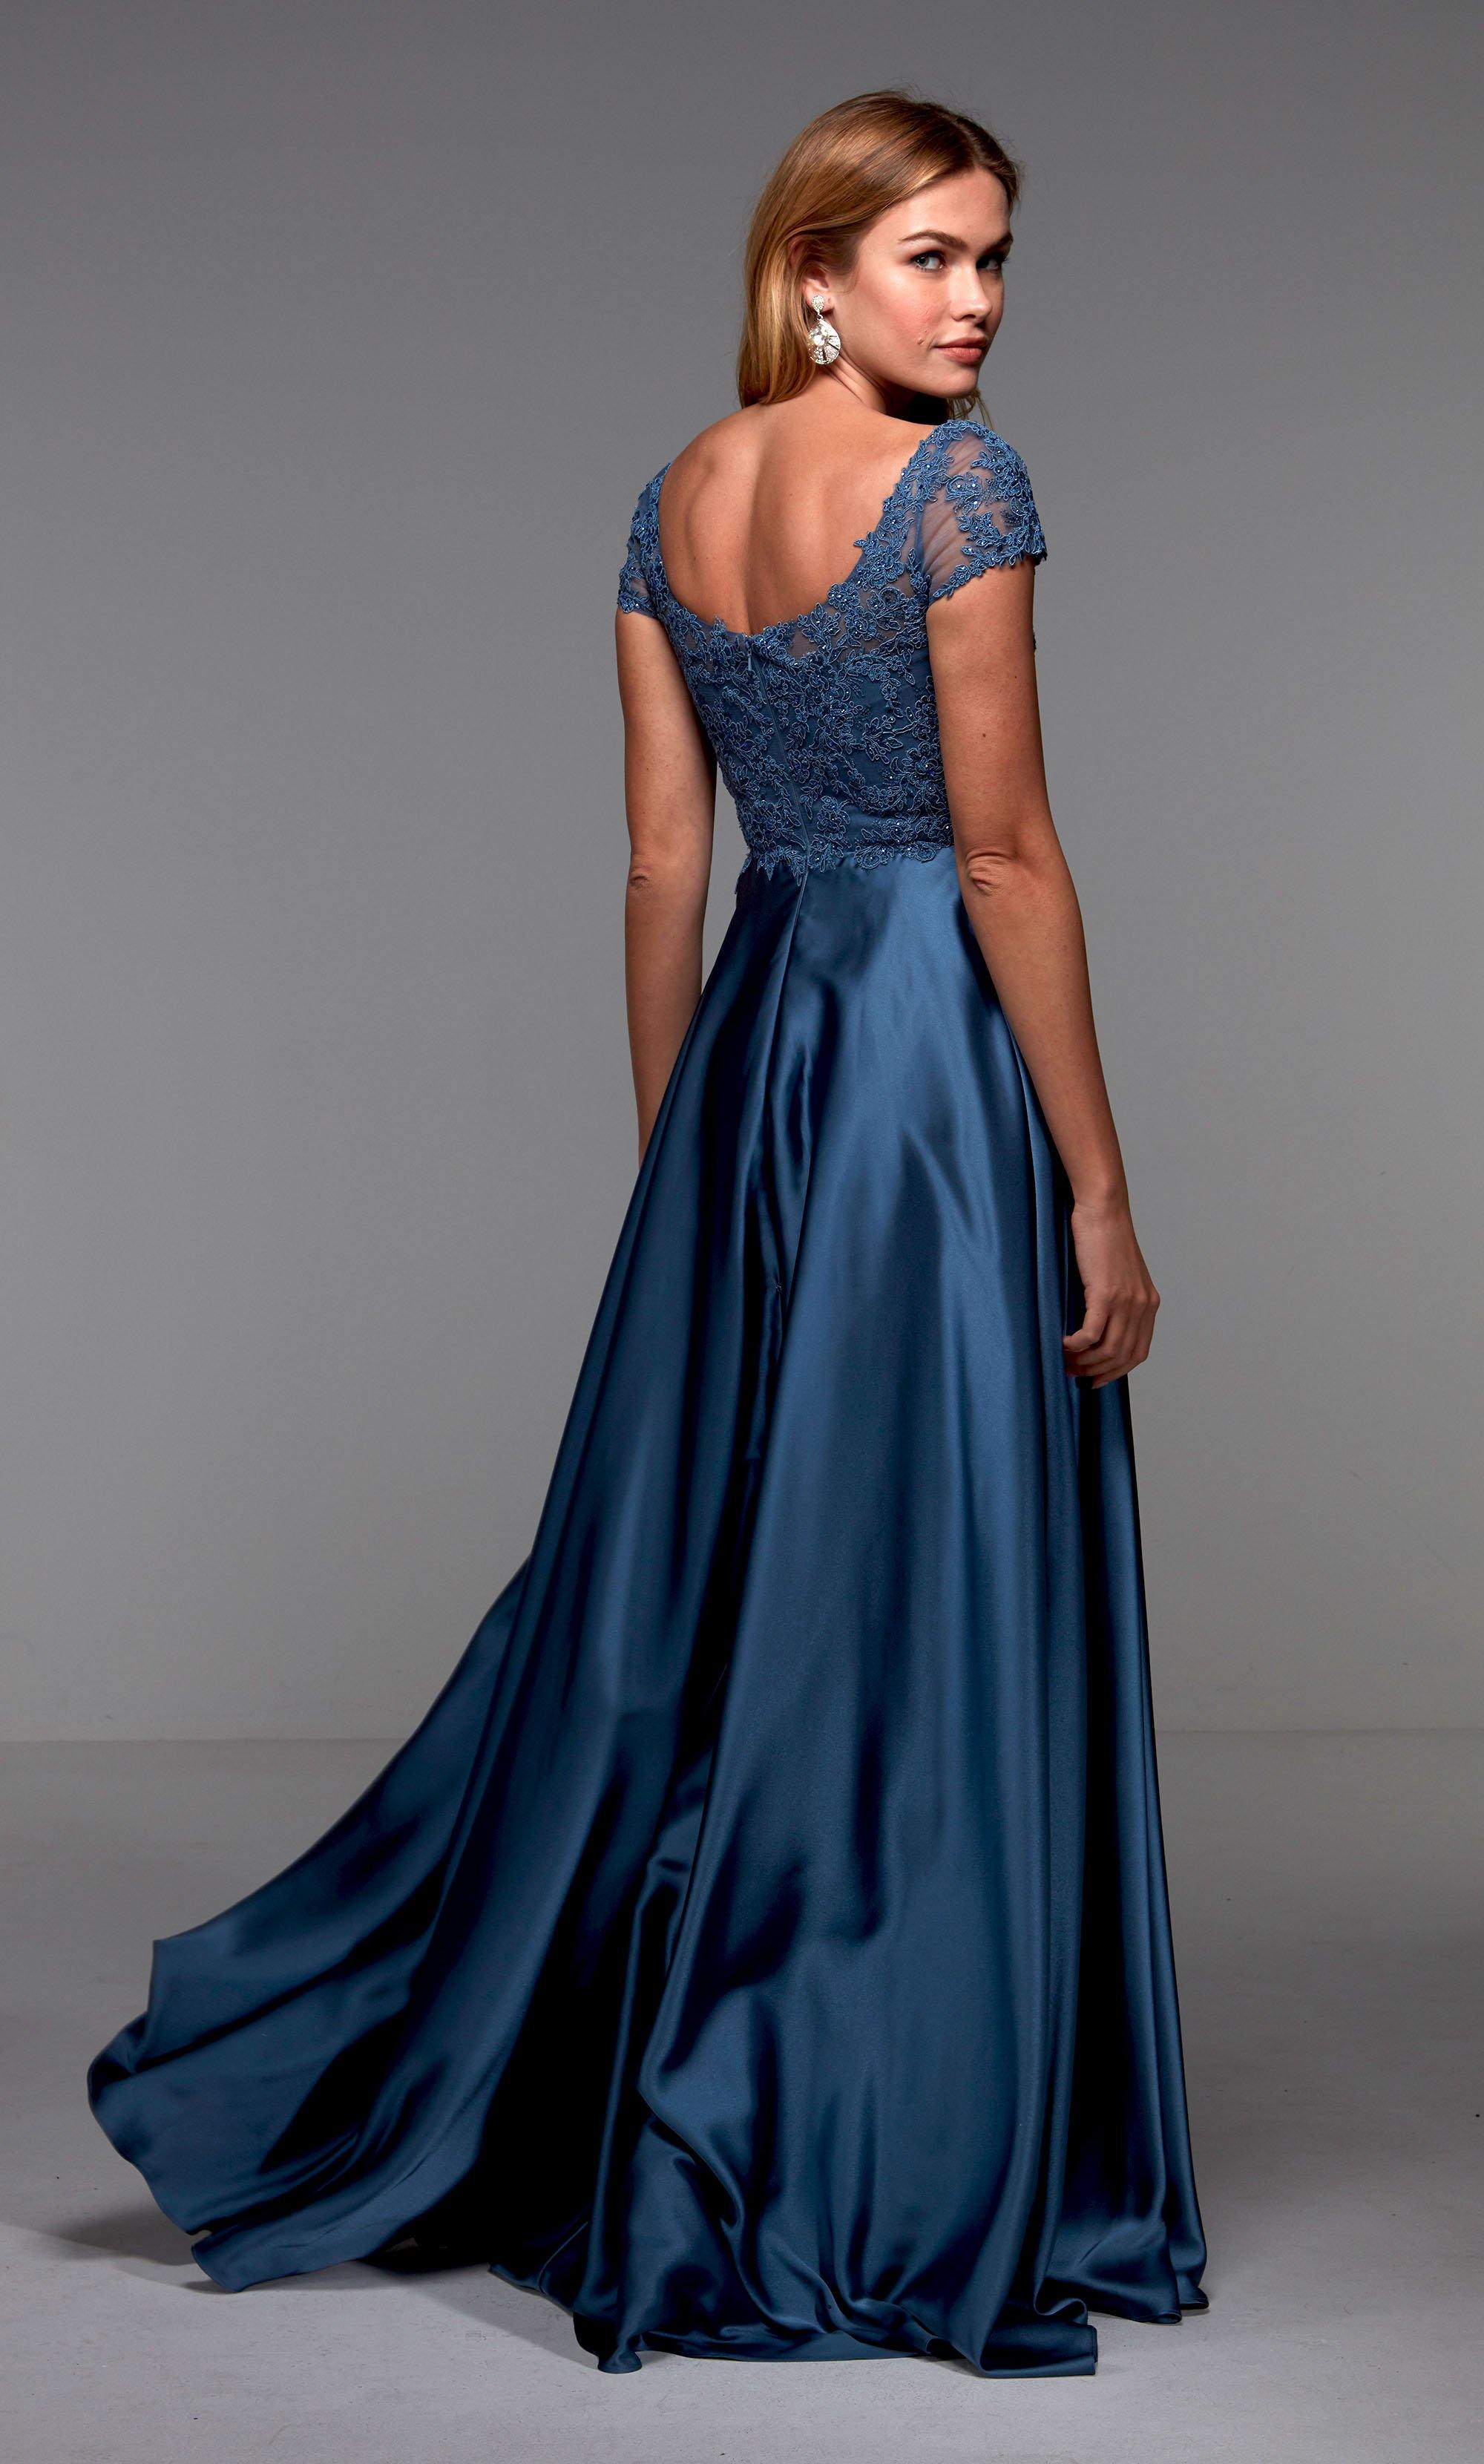 Blue satin evening dress with a scoop neck, short sleeves, and lace bodice